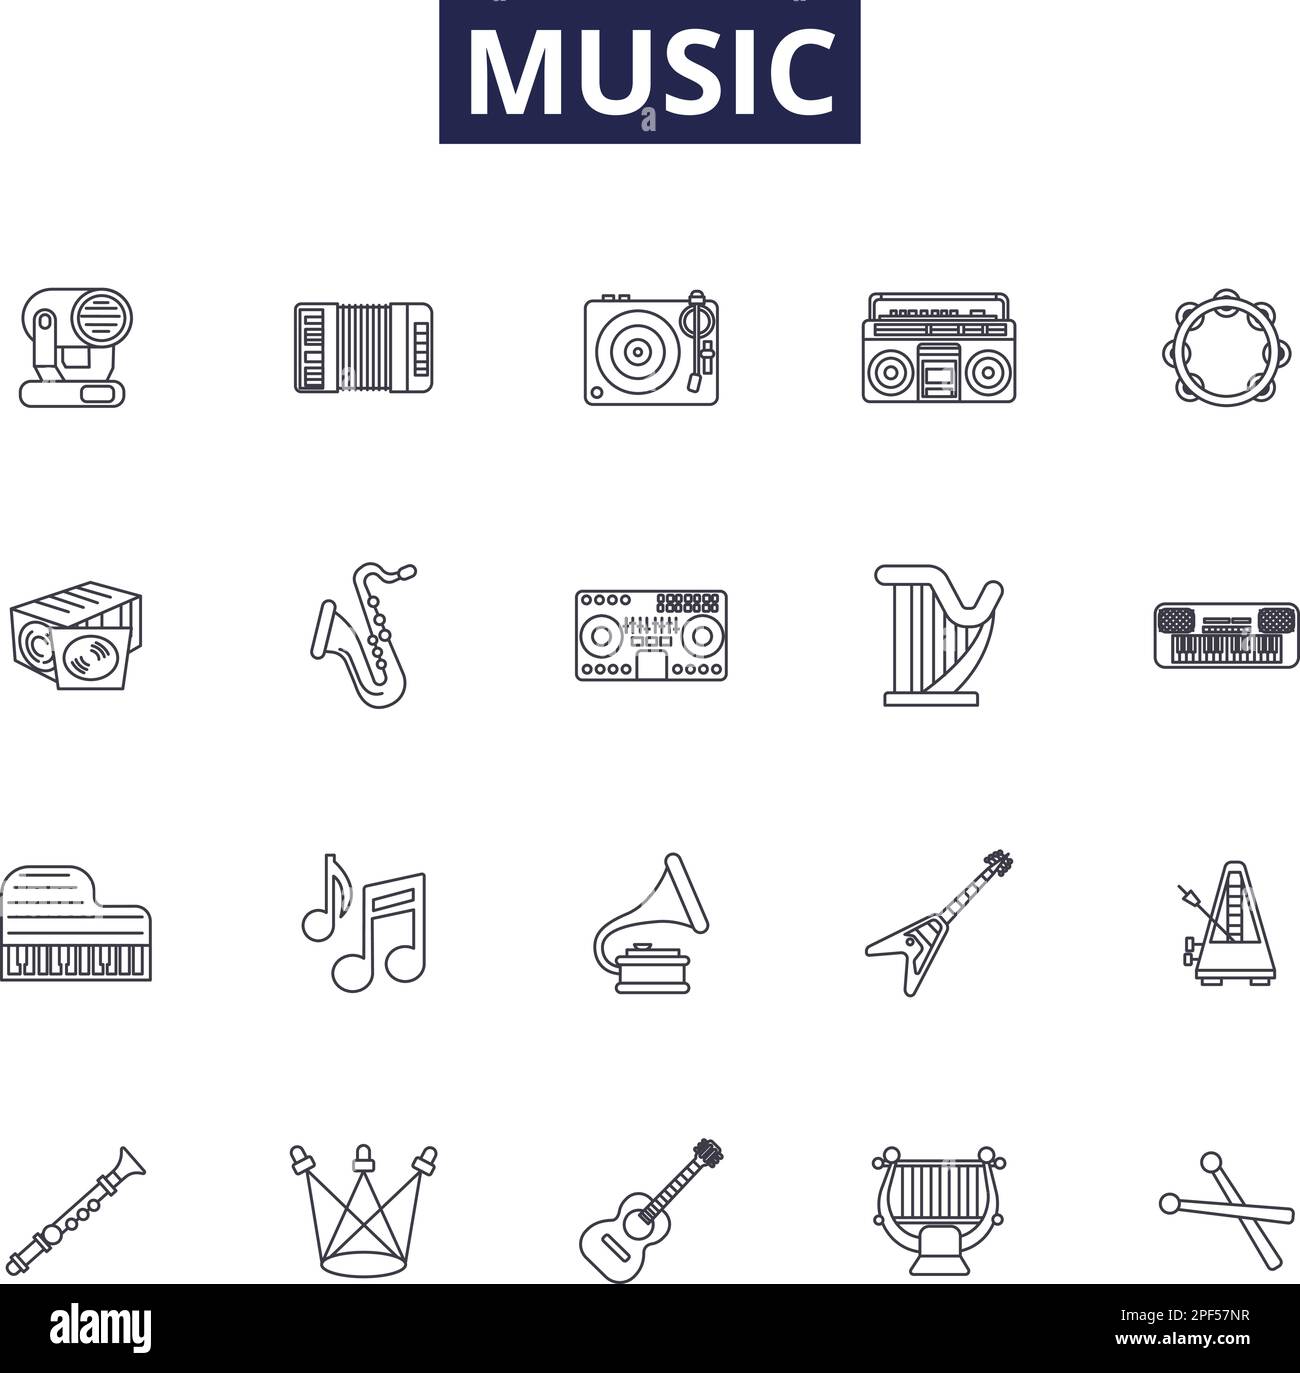 Music line vector icons and signs. Harmony, Opera, Concert, Band, Singer, Jazz, Rhythm, Strings outline vector illustration set Stock Vector